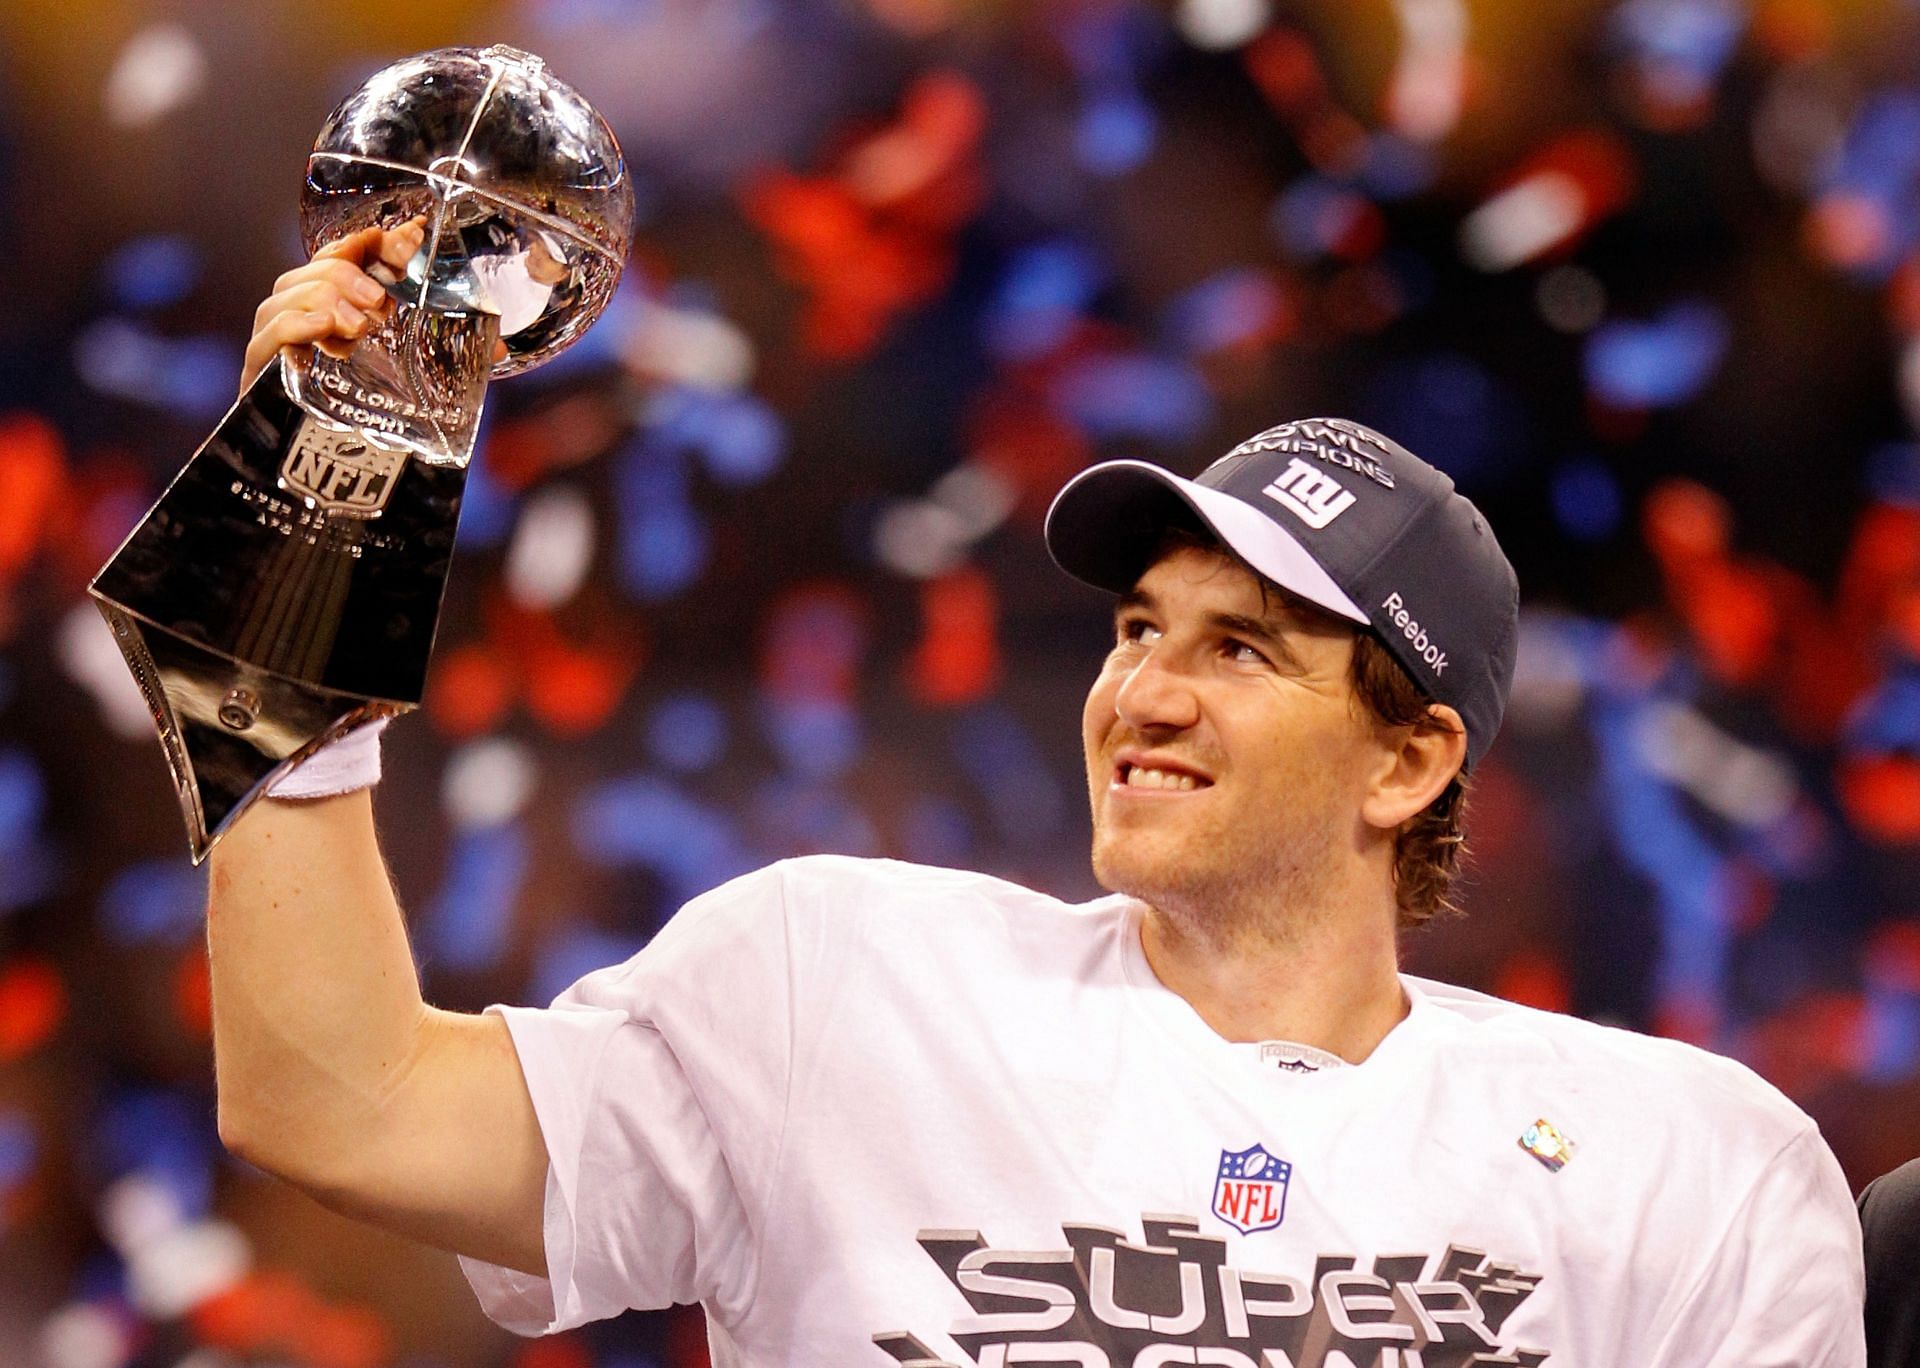 Eli Manning lifting the Vince Lombardi trophy